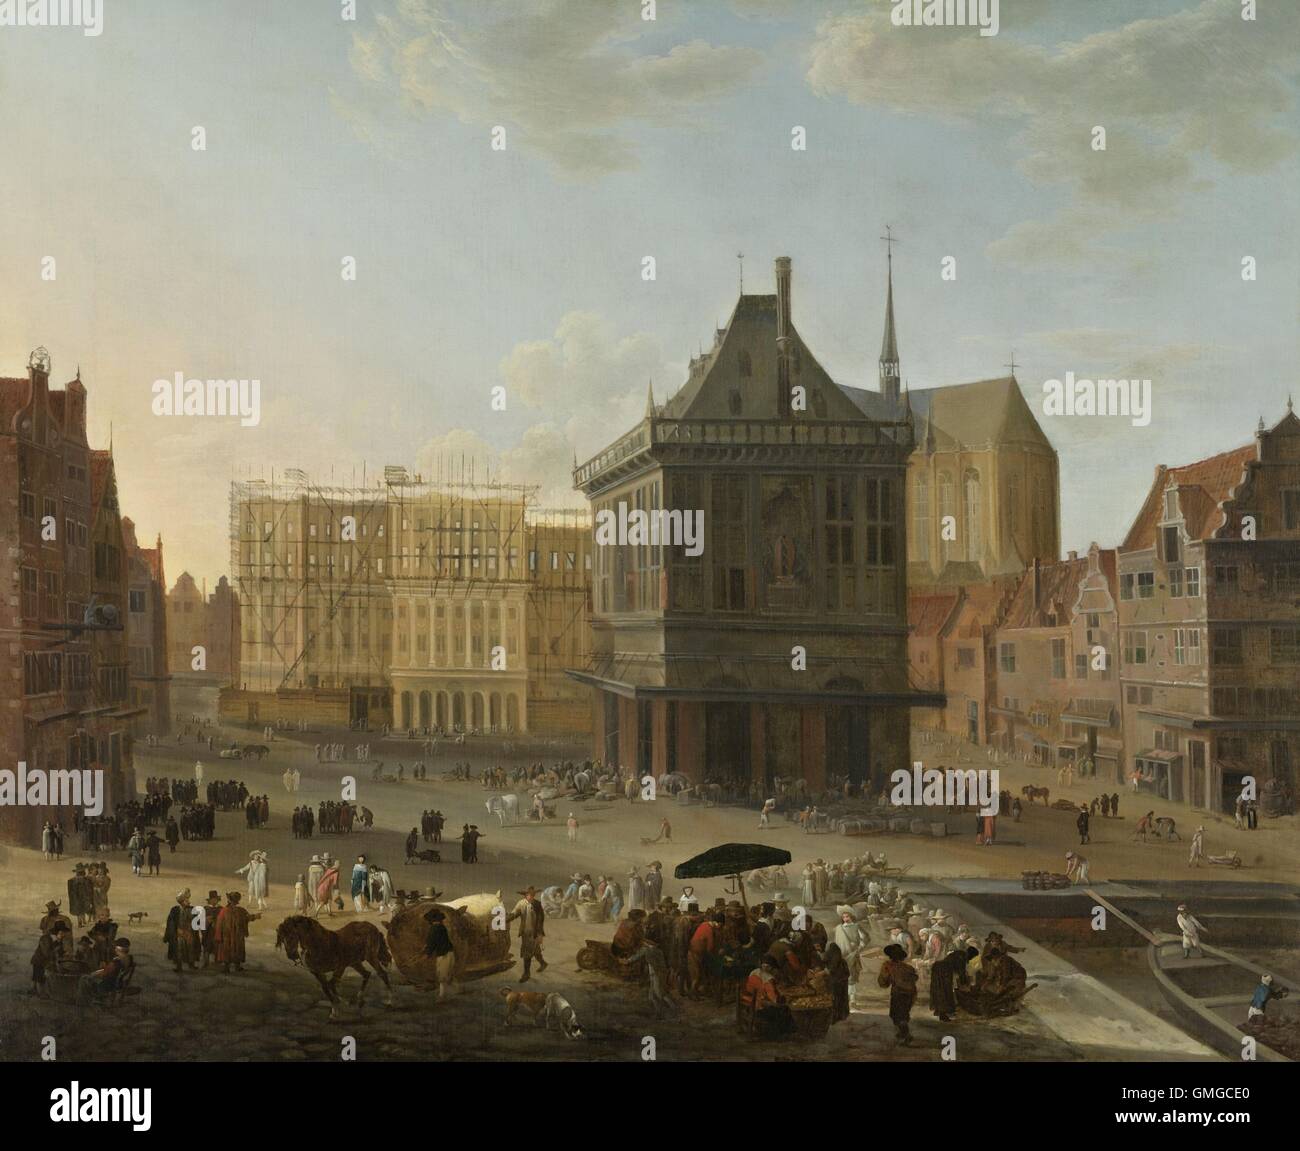 The Dam in Amsterdam, and New Town Hall Under Construction, attrib. to Jacob van der Ulft, 1652-89. Dutch painting, oil on canvas. In Center is the public 'Waag' or Weighing Building that measured the weight of goods to levy taxes (BSLOC 2016 3 260) Stock Photo